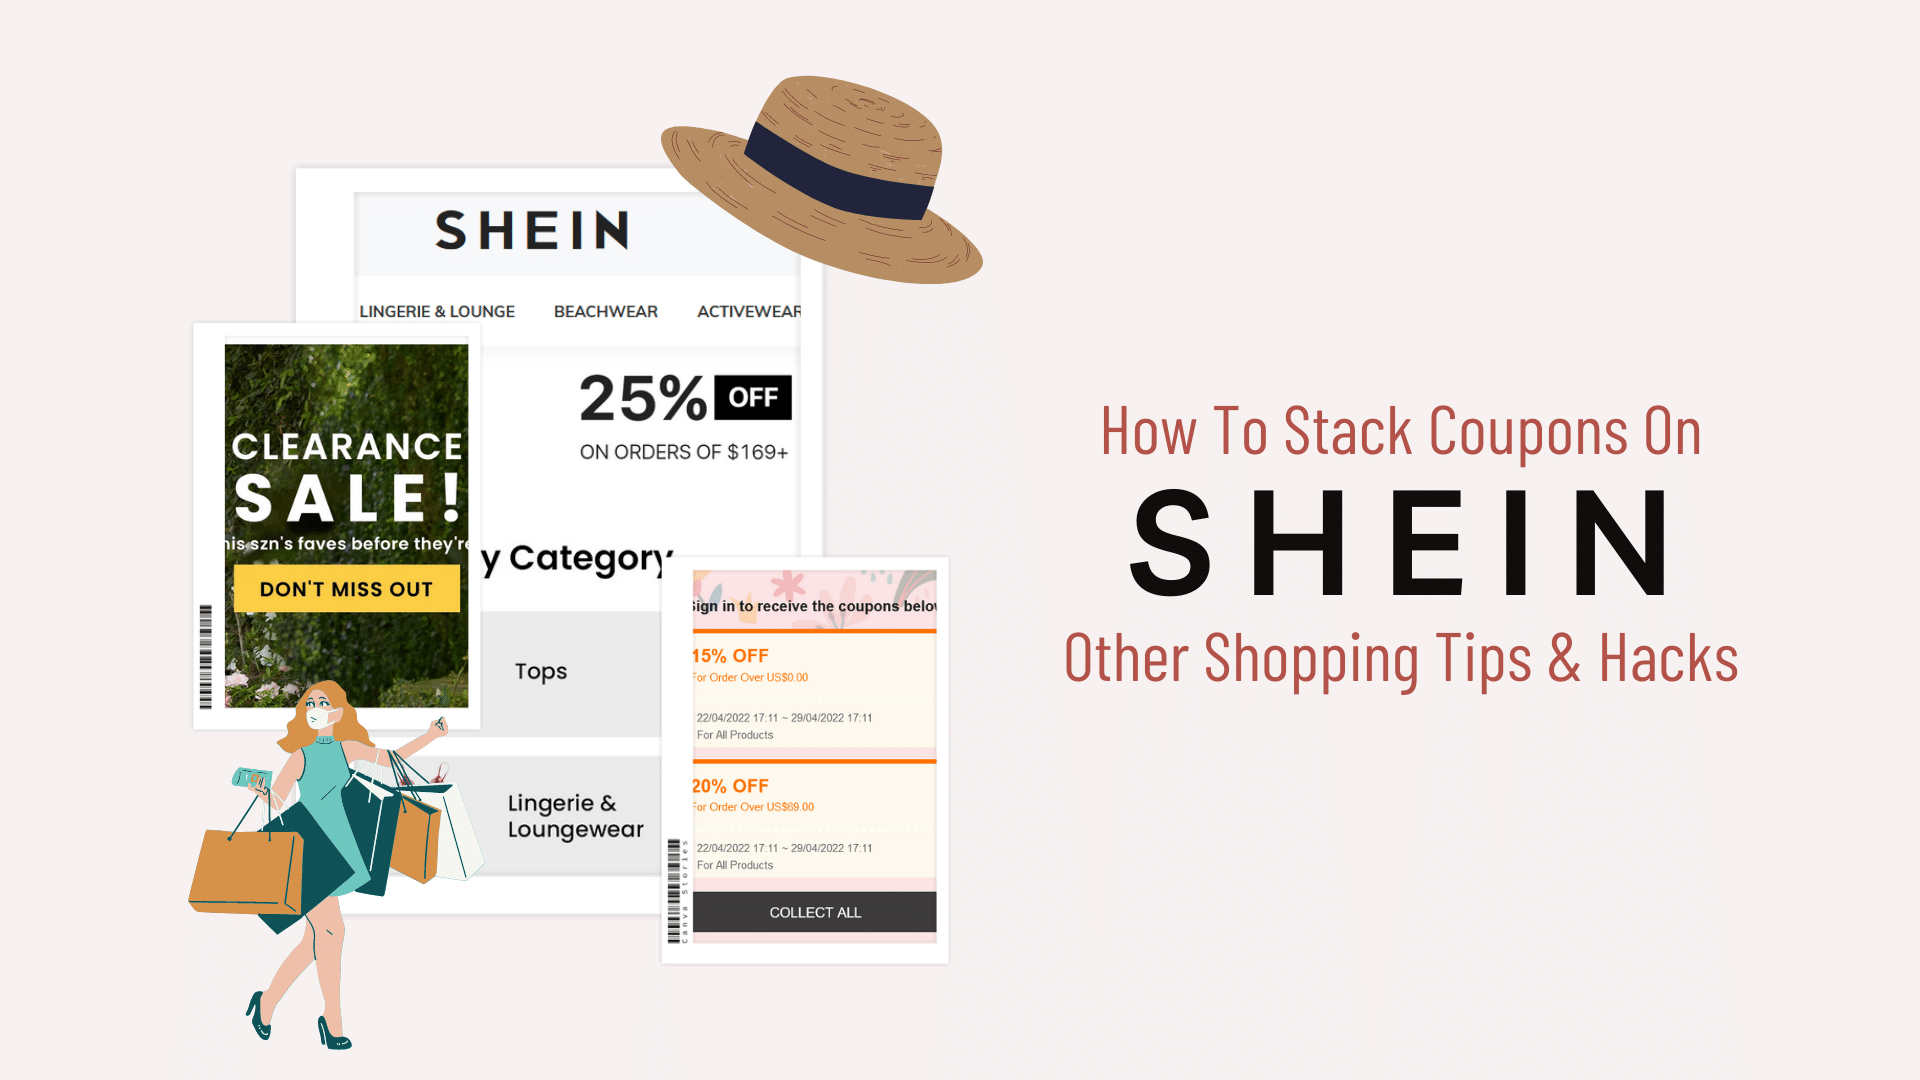 How To Stack Coupons On Shein & Other Shopping Hacks